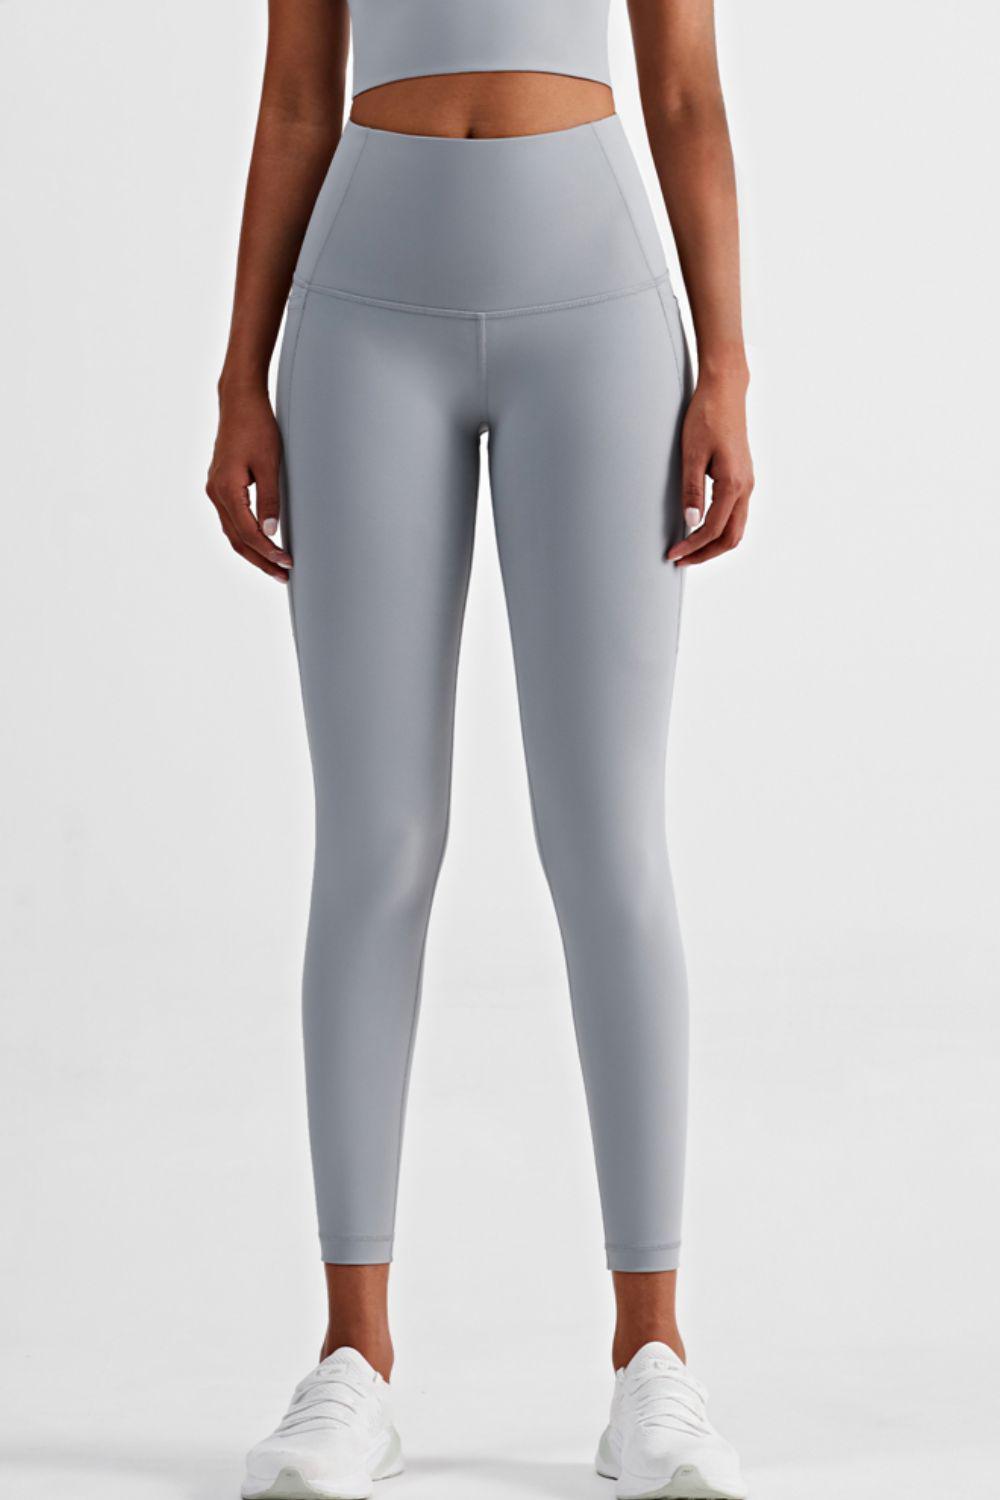 Wide Waistband Sports Leggings with Side Pockets-BOTTOM SIZES SMALL MEDIUM LARGE-[Adult]-[Female]-Cloudy Blue-S-2022 Online Blue Zone Planet